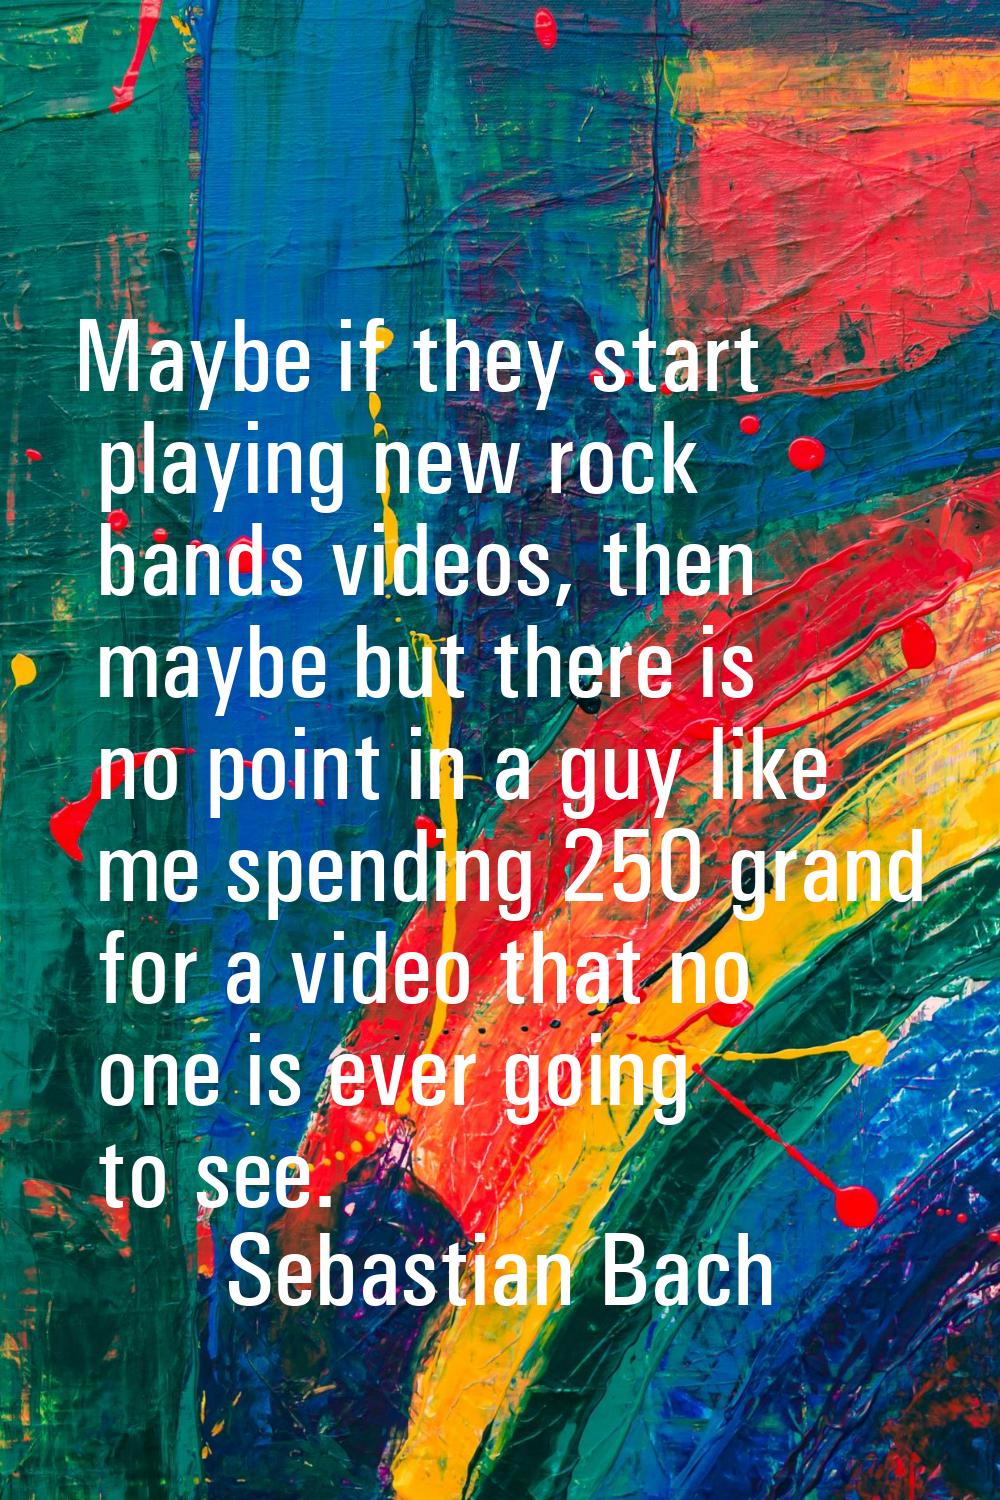 Maybe if they start playing new rock bands videos, then maybe but there is no point in a guy like m